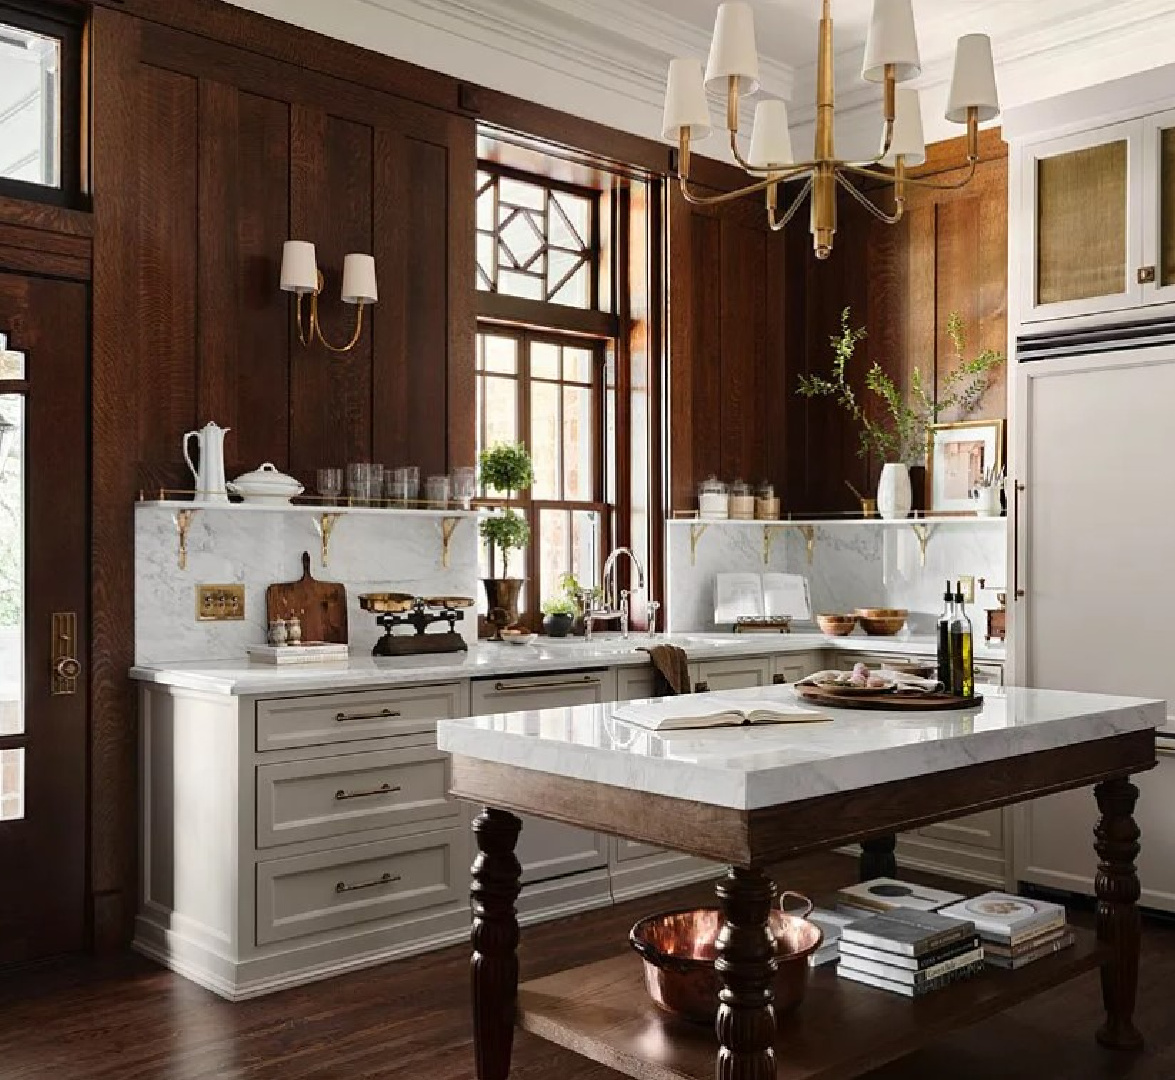 Beautiful kitchen with dark wood and white marble in Fixer Upper The Castle.